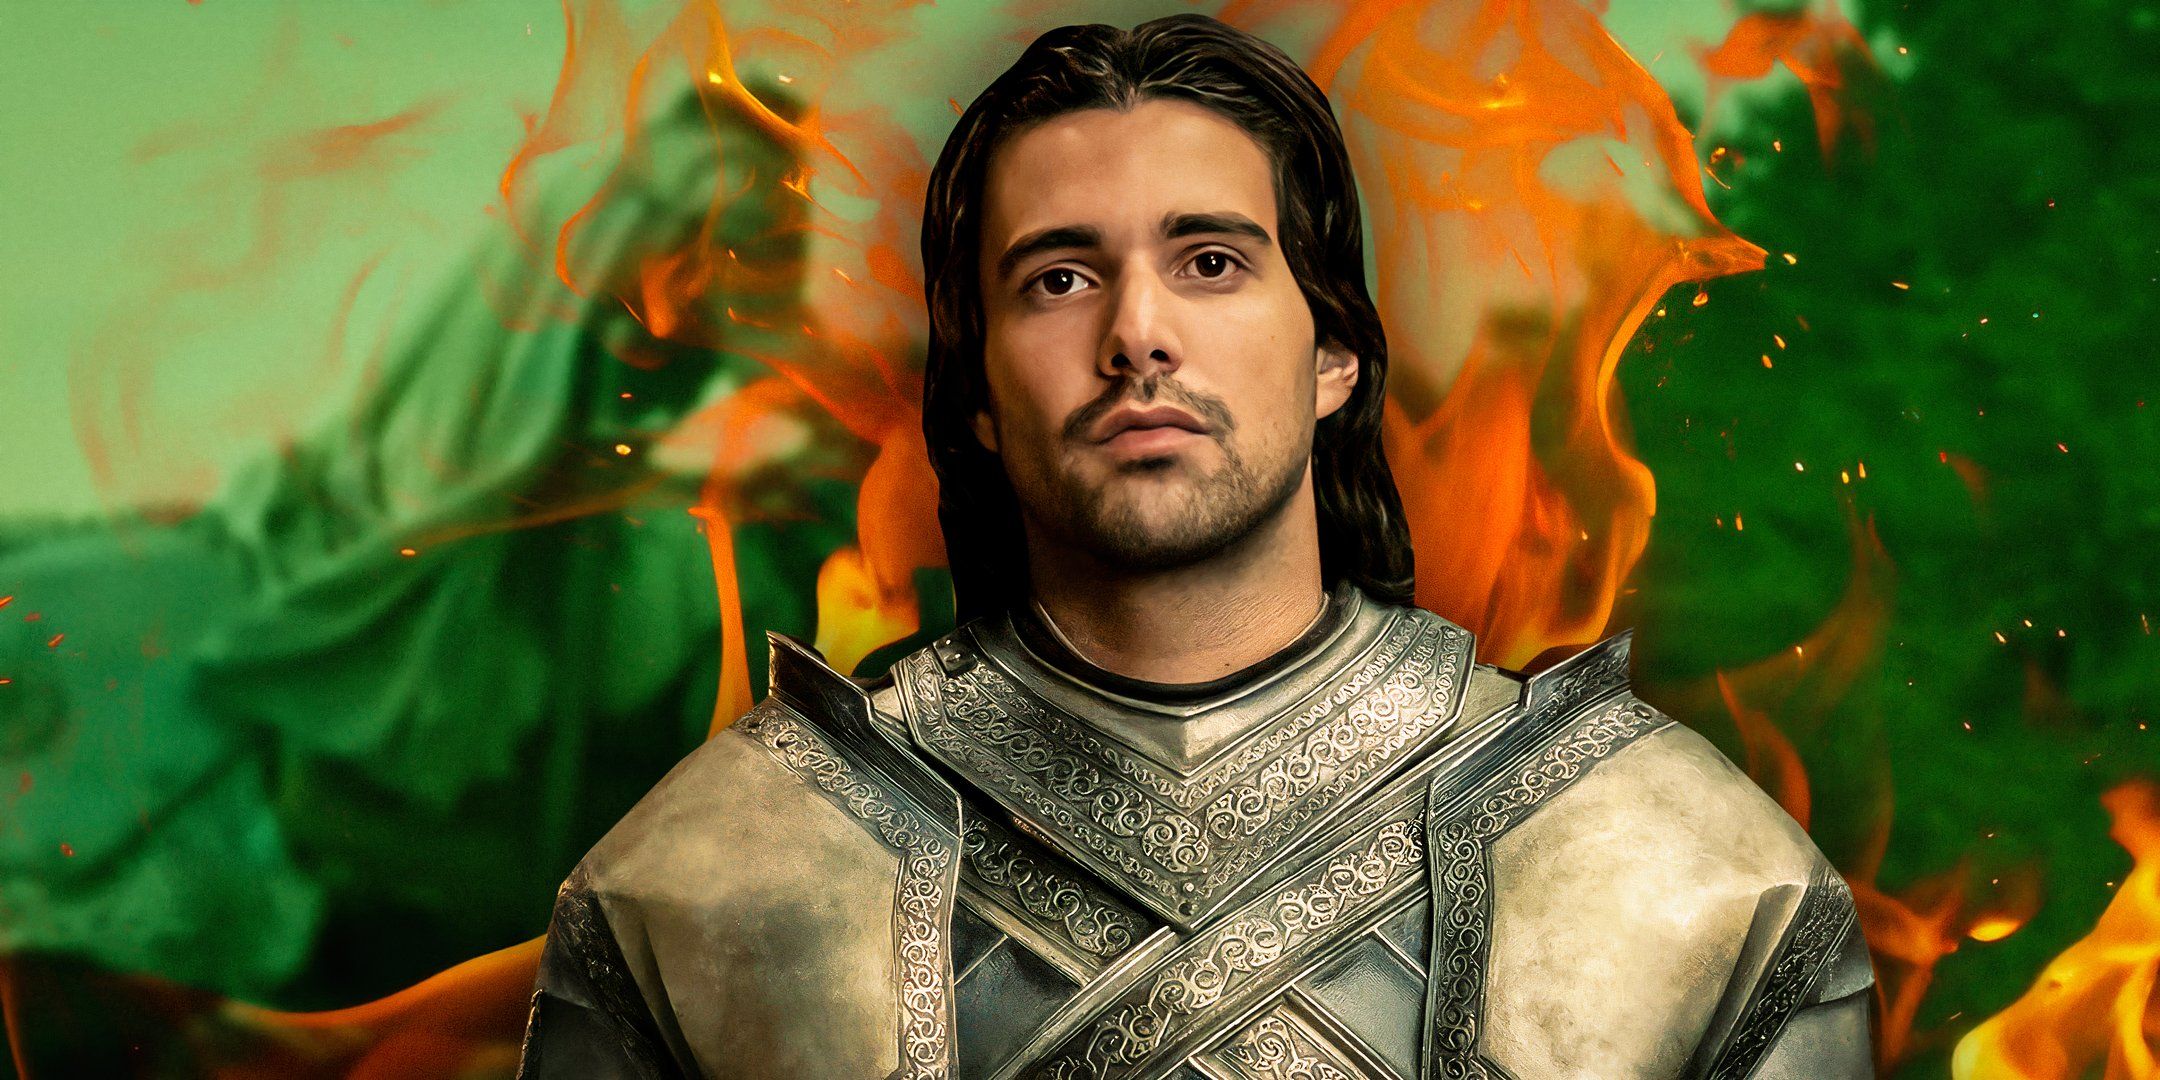 Fabien Frankel as Ser Criston Cole in armor and riding a horse in the background in House of the Dragon